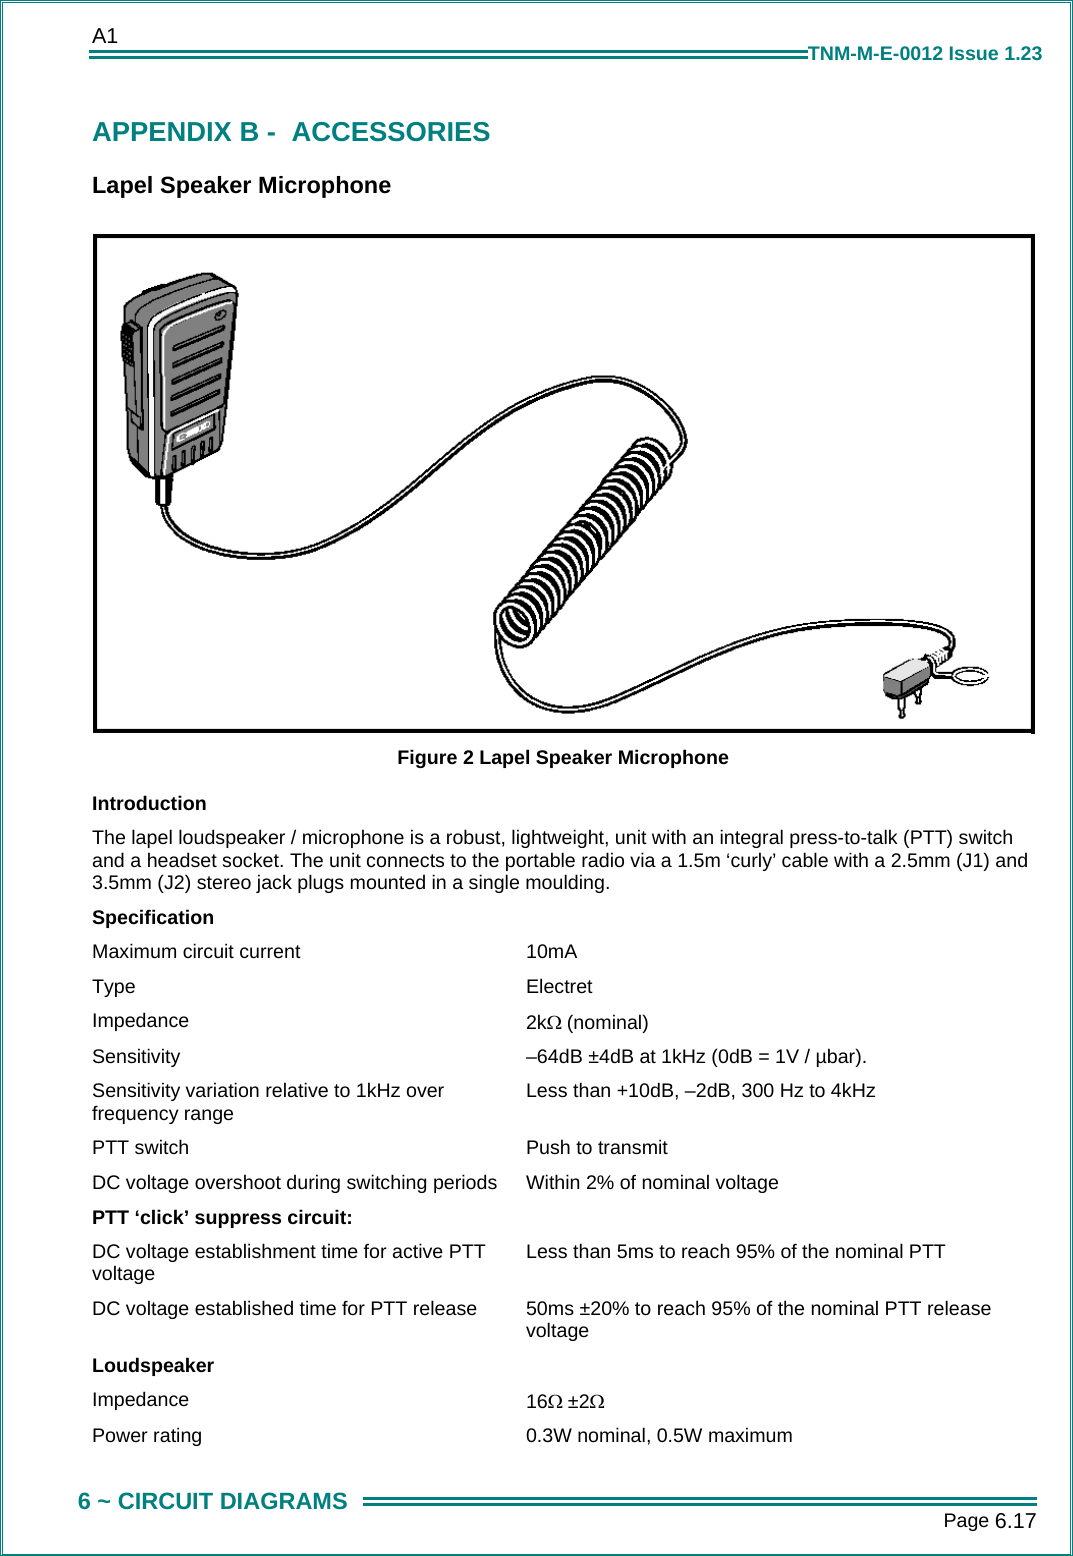 A1      Page 6.17  6 ~ CIRCUIT DIAGRAMS TNM-M-E-0012 Issue 1.23 APPENDIX B -  ACCESSORIES Lapel Speaker Microphone  Figure 2 Lapel Speaker Microphone Introduction The lapel loudspeaker / microphone is a robust, lightweight, unit with an integral press-to-talk (PTT) switch and a headset socket. The unit connects to the portable radio via a 1.5m ‘curly’ cable with a 2.5mm (J1) and 3.5mm (J2) stereo jack plugs mounted in a single moulding. Specification Maximum circuit current  10mA Type Electret Impedance  2kΩ (nominal) Sensitivity  –64dB ±4dB at 1kHz (0dB = 1V / µbar). Sensitivity variation relative to 1kHz over frequency range  Less than +10dB, –2dB, 300 Hz to 4kHz PTT switch  Push to transmit DC voltage overshoot during switching periods  Within 2% of nominal voltage PTT ‘click’ suppress circuit:   DC voltage establishment time for active PTT voltage  Less than 5ms to reach 95% of the nominal PTT DC voltage established time for PTT release  50ms ±20% to reach 95% of the nominal PTT release voltage Loudspeaker  Impedance   16Ω ±2Ω Power rating  0.3W nominal, 0.5W maximum 